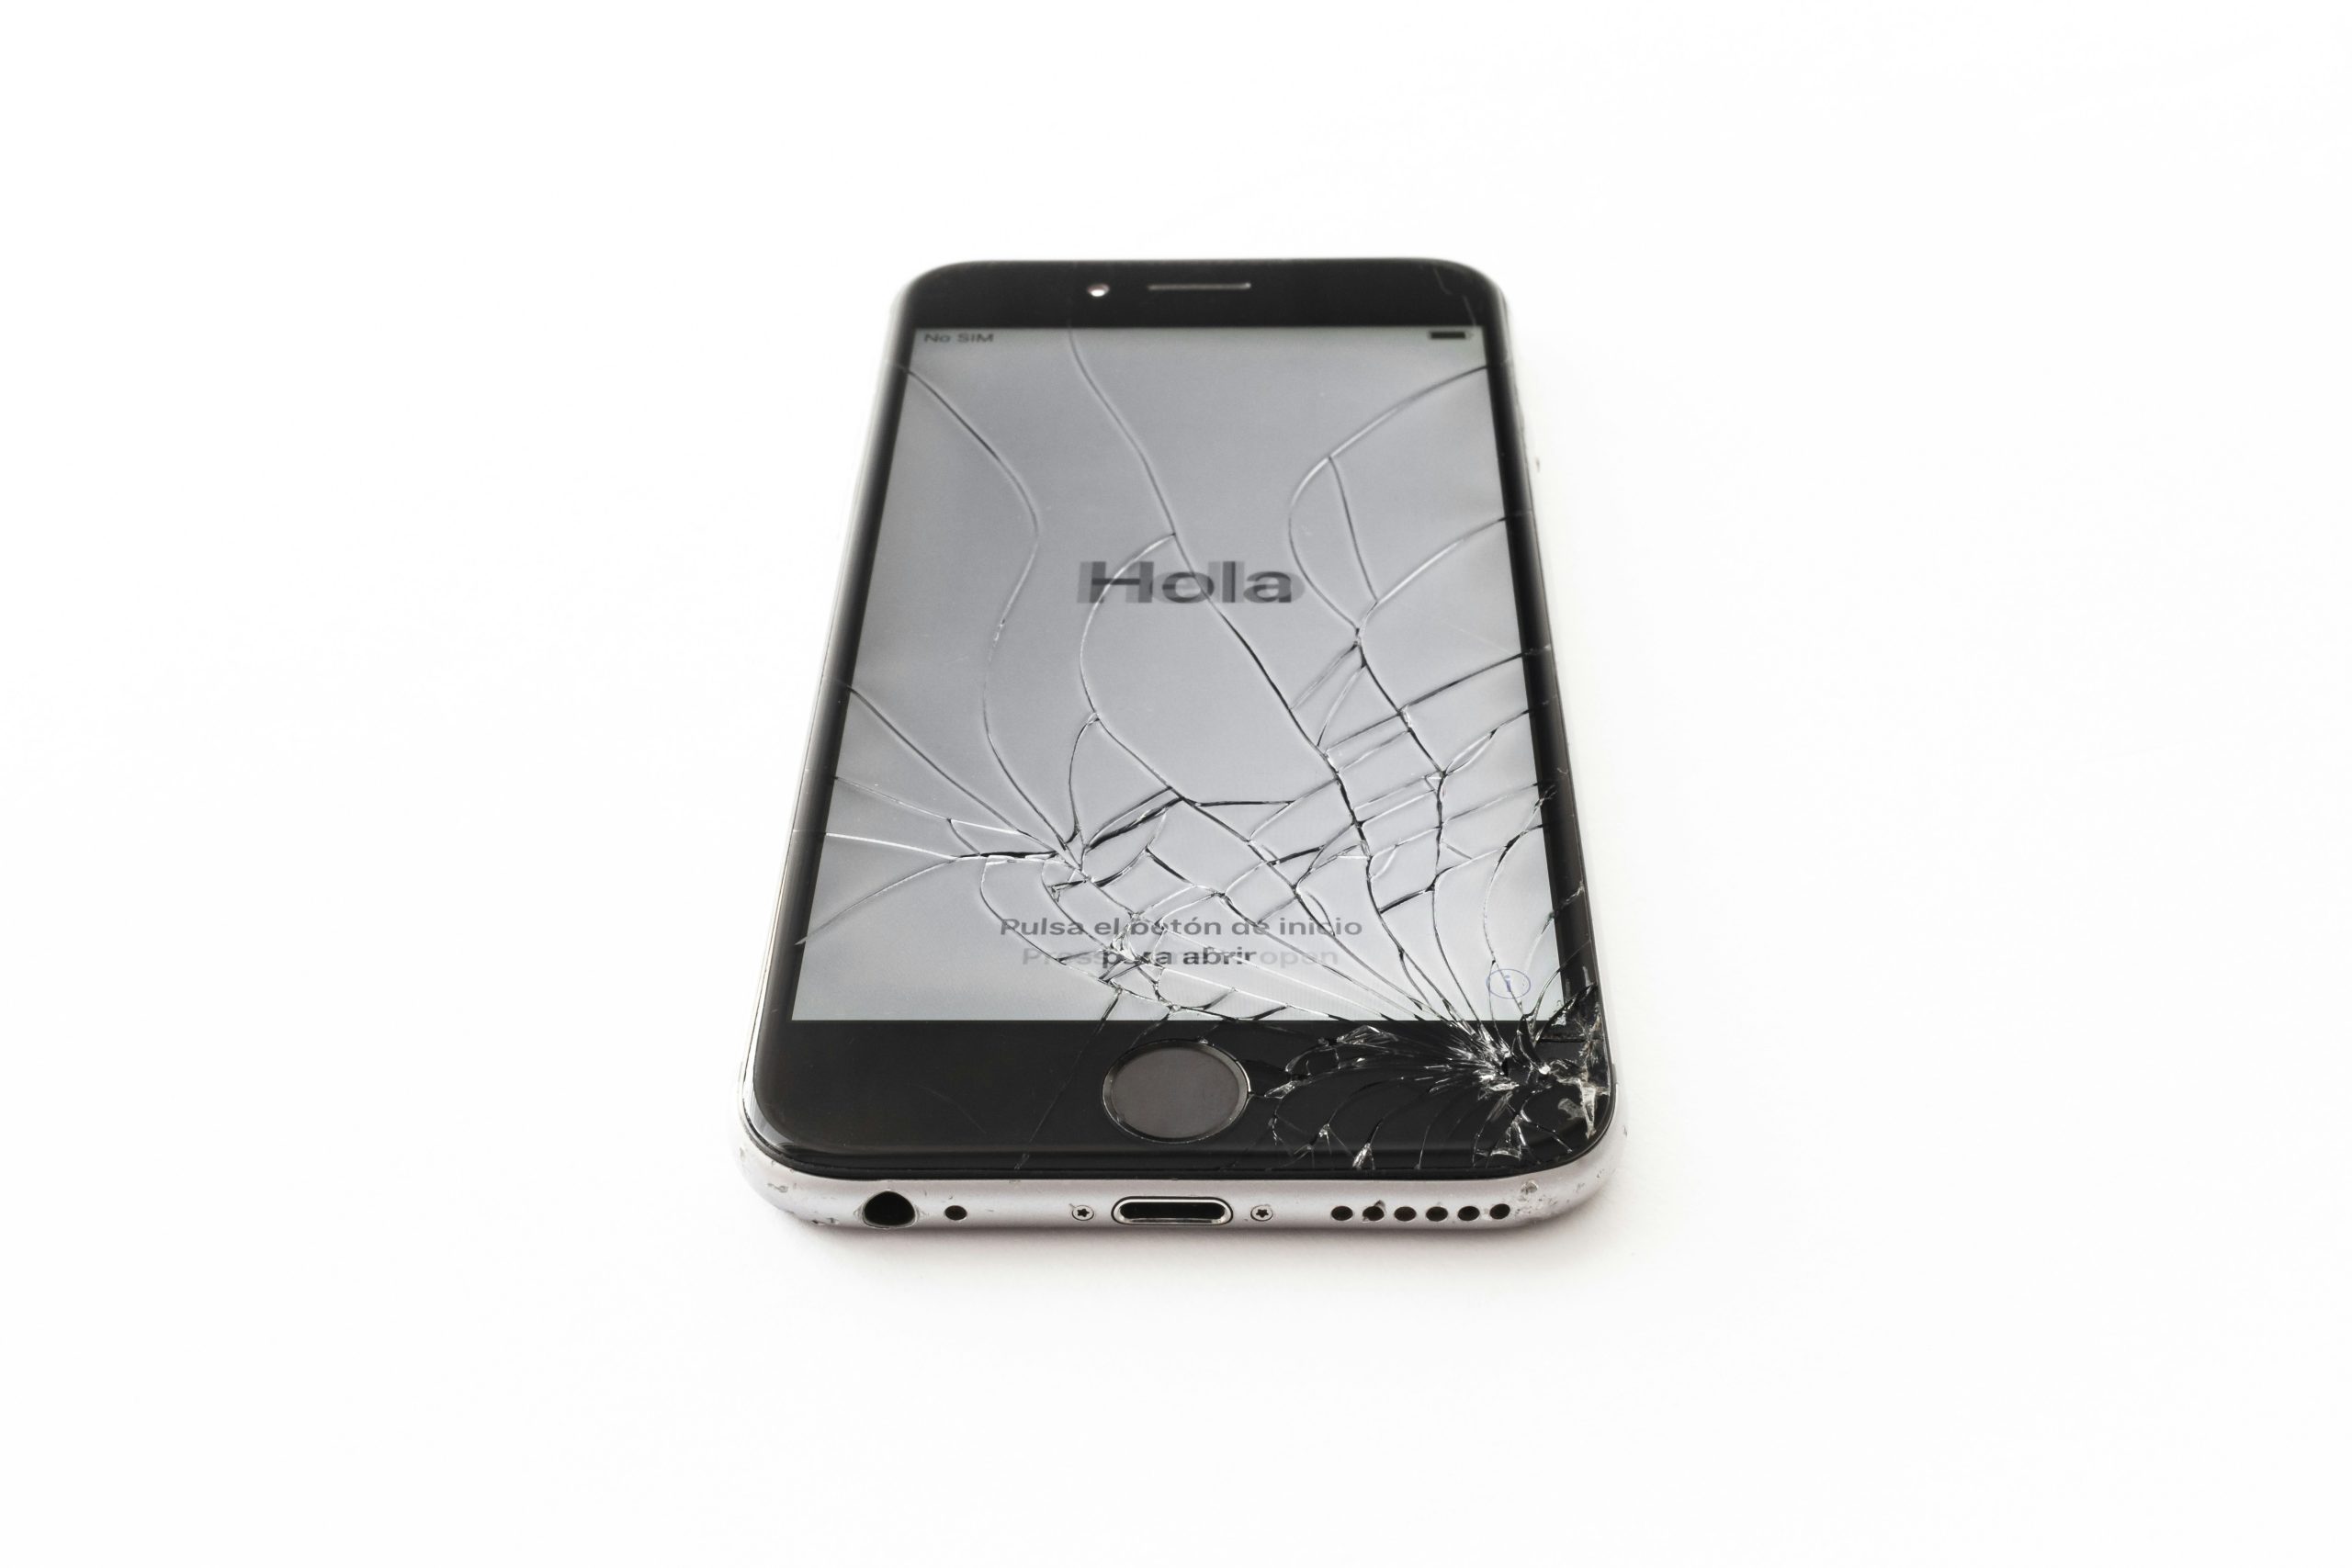 Cashing In On Broken iPhones A Guide To Selling Damaged iPhones In Baton Rouge